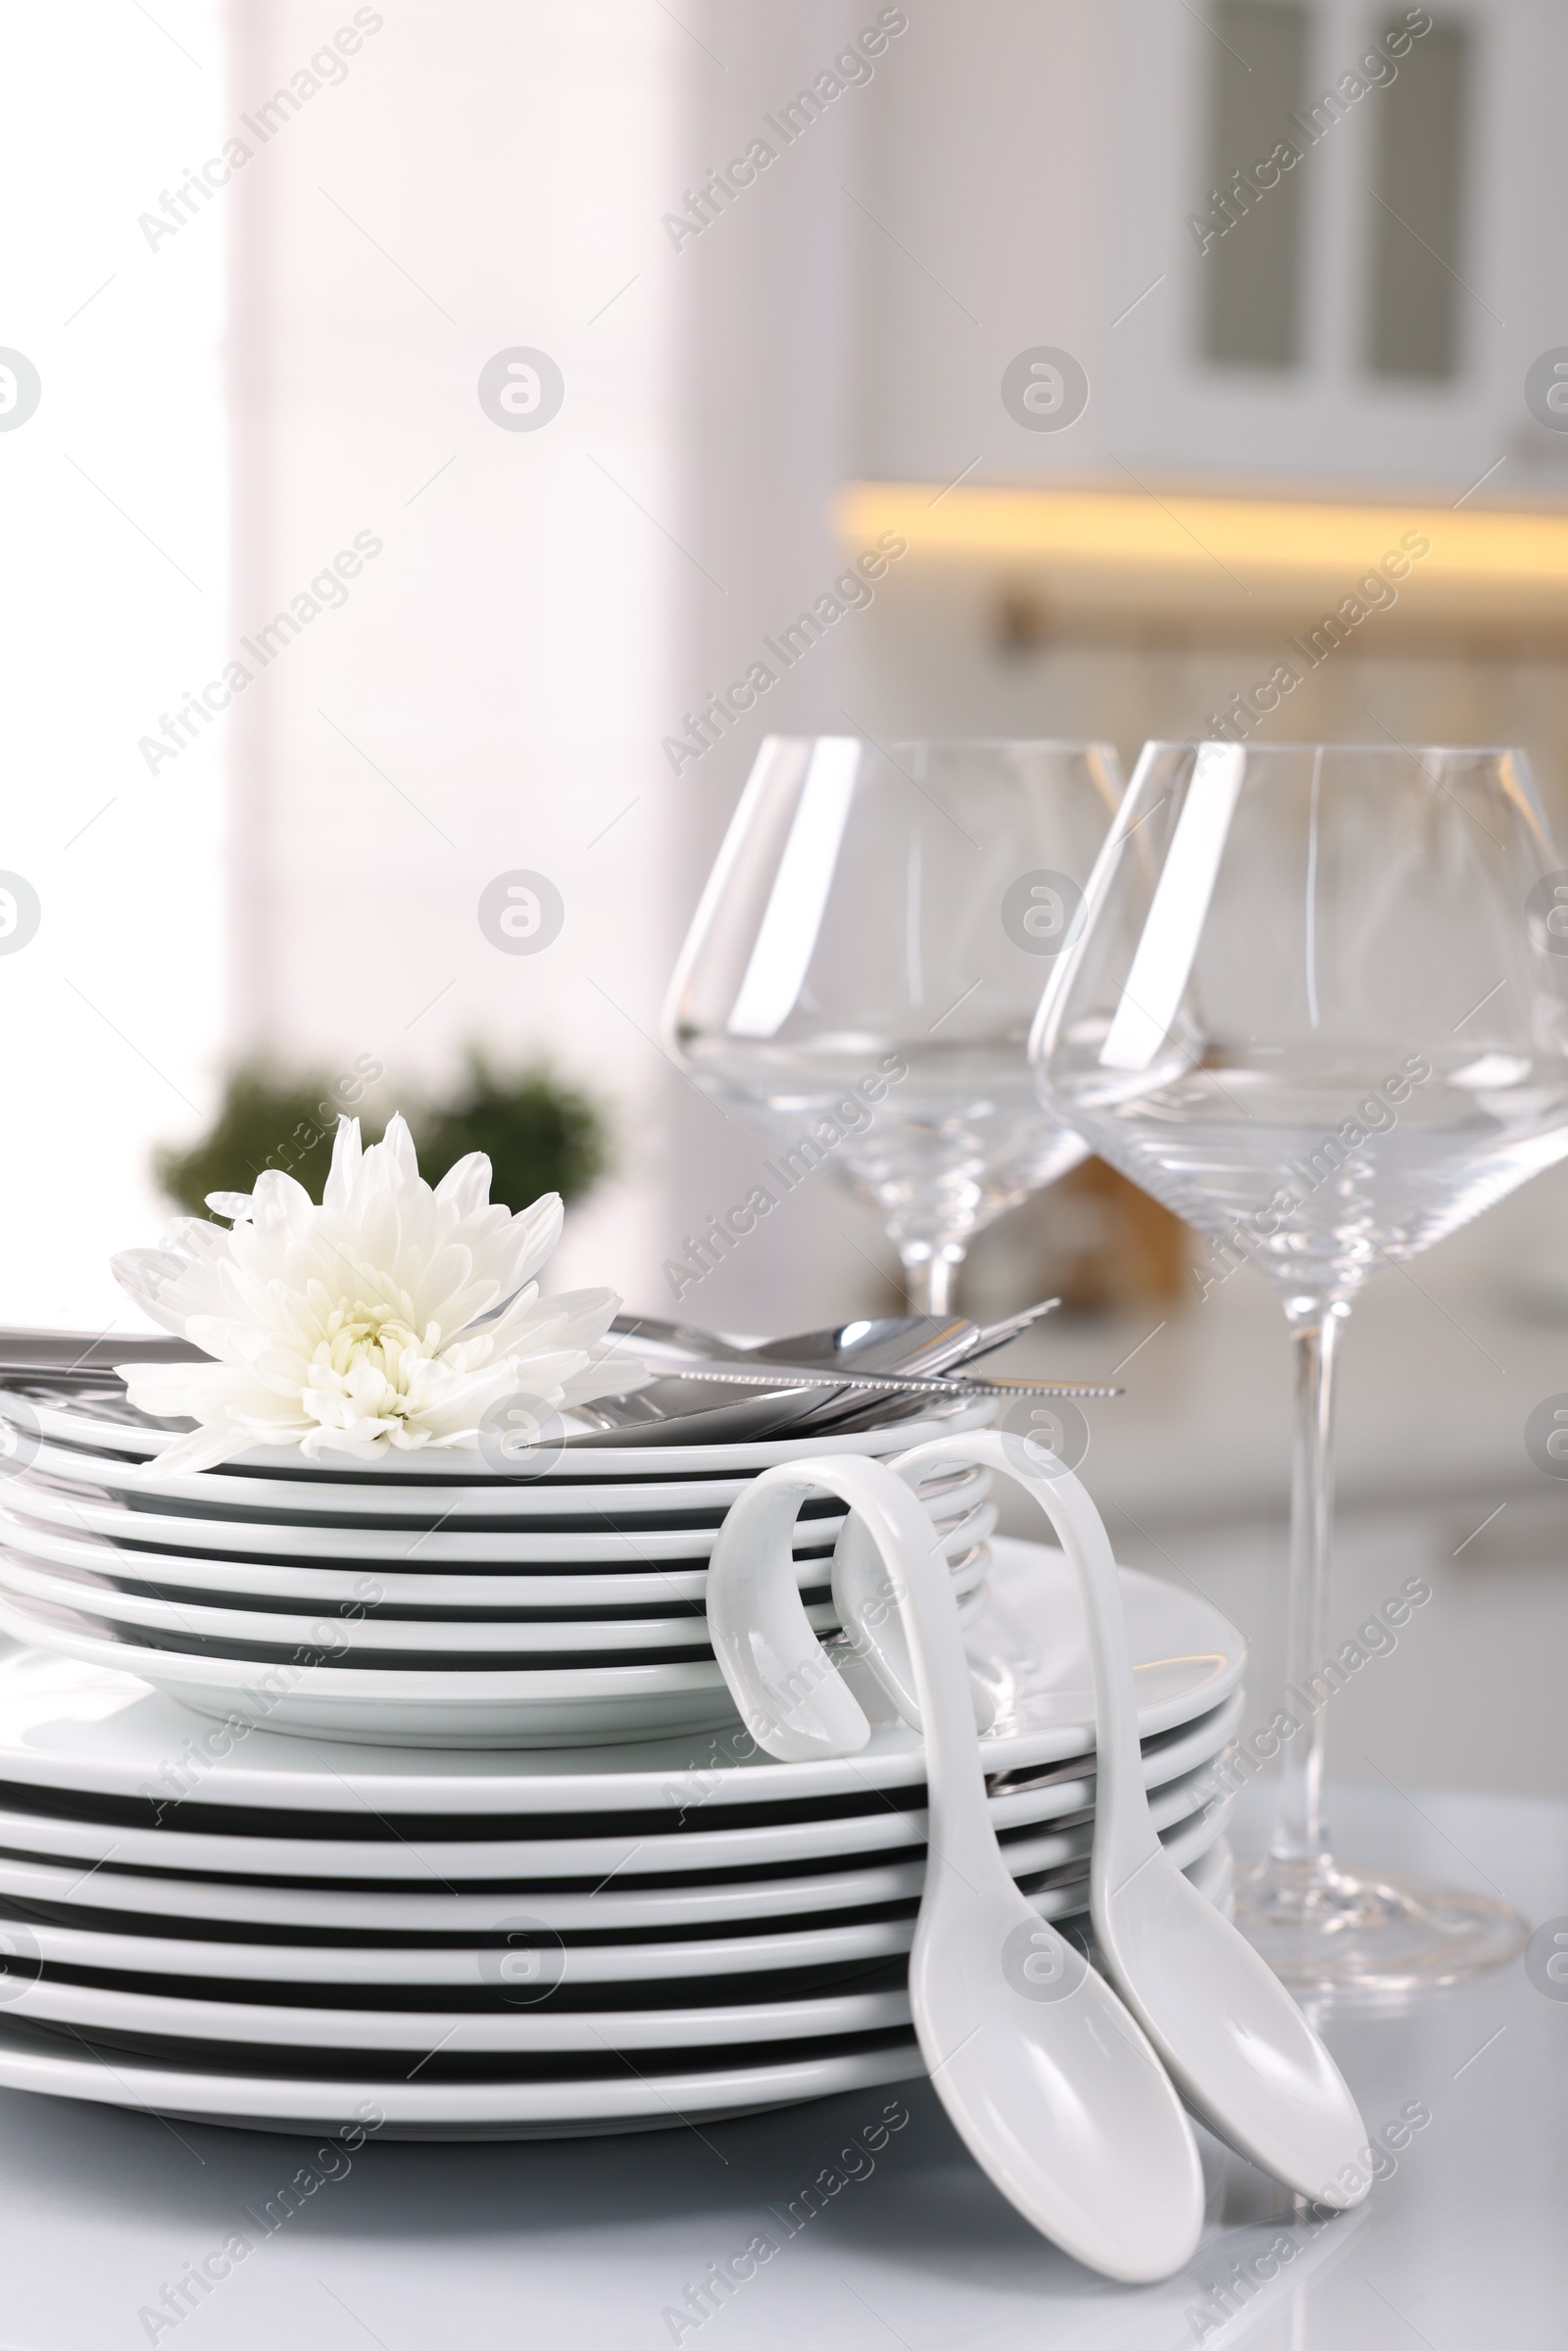 Photo of Set of clean dishware, glasses, cutlery and flower on table in kitchen